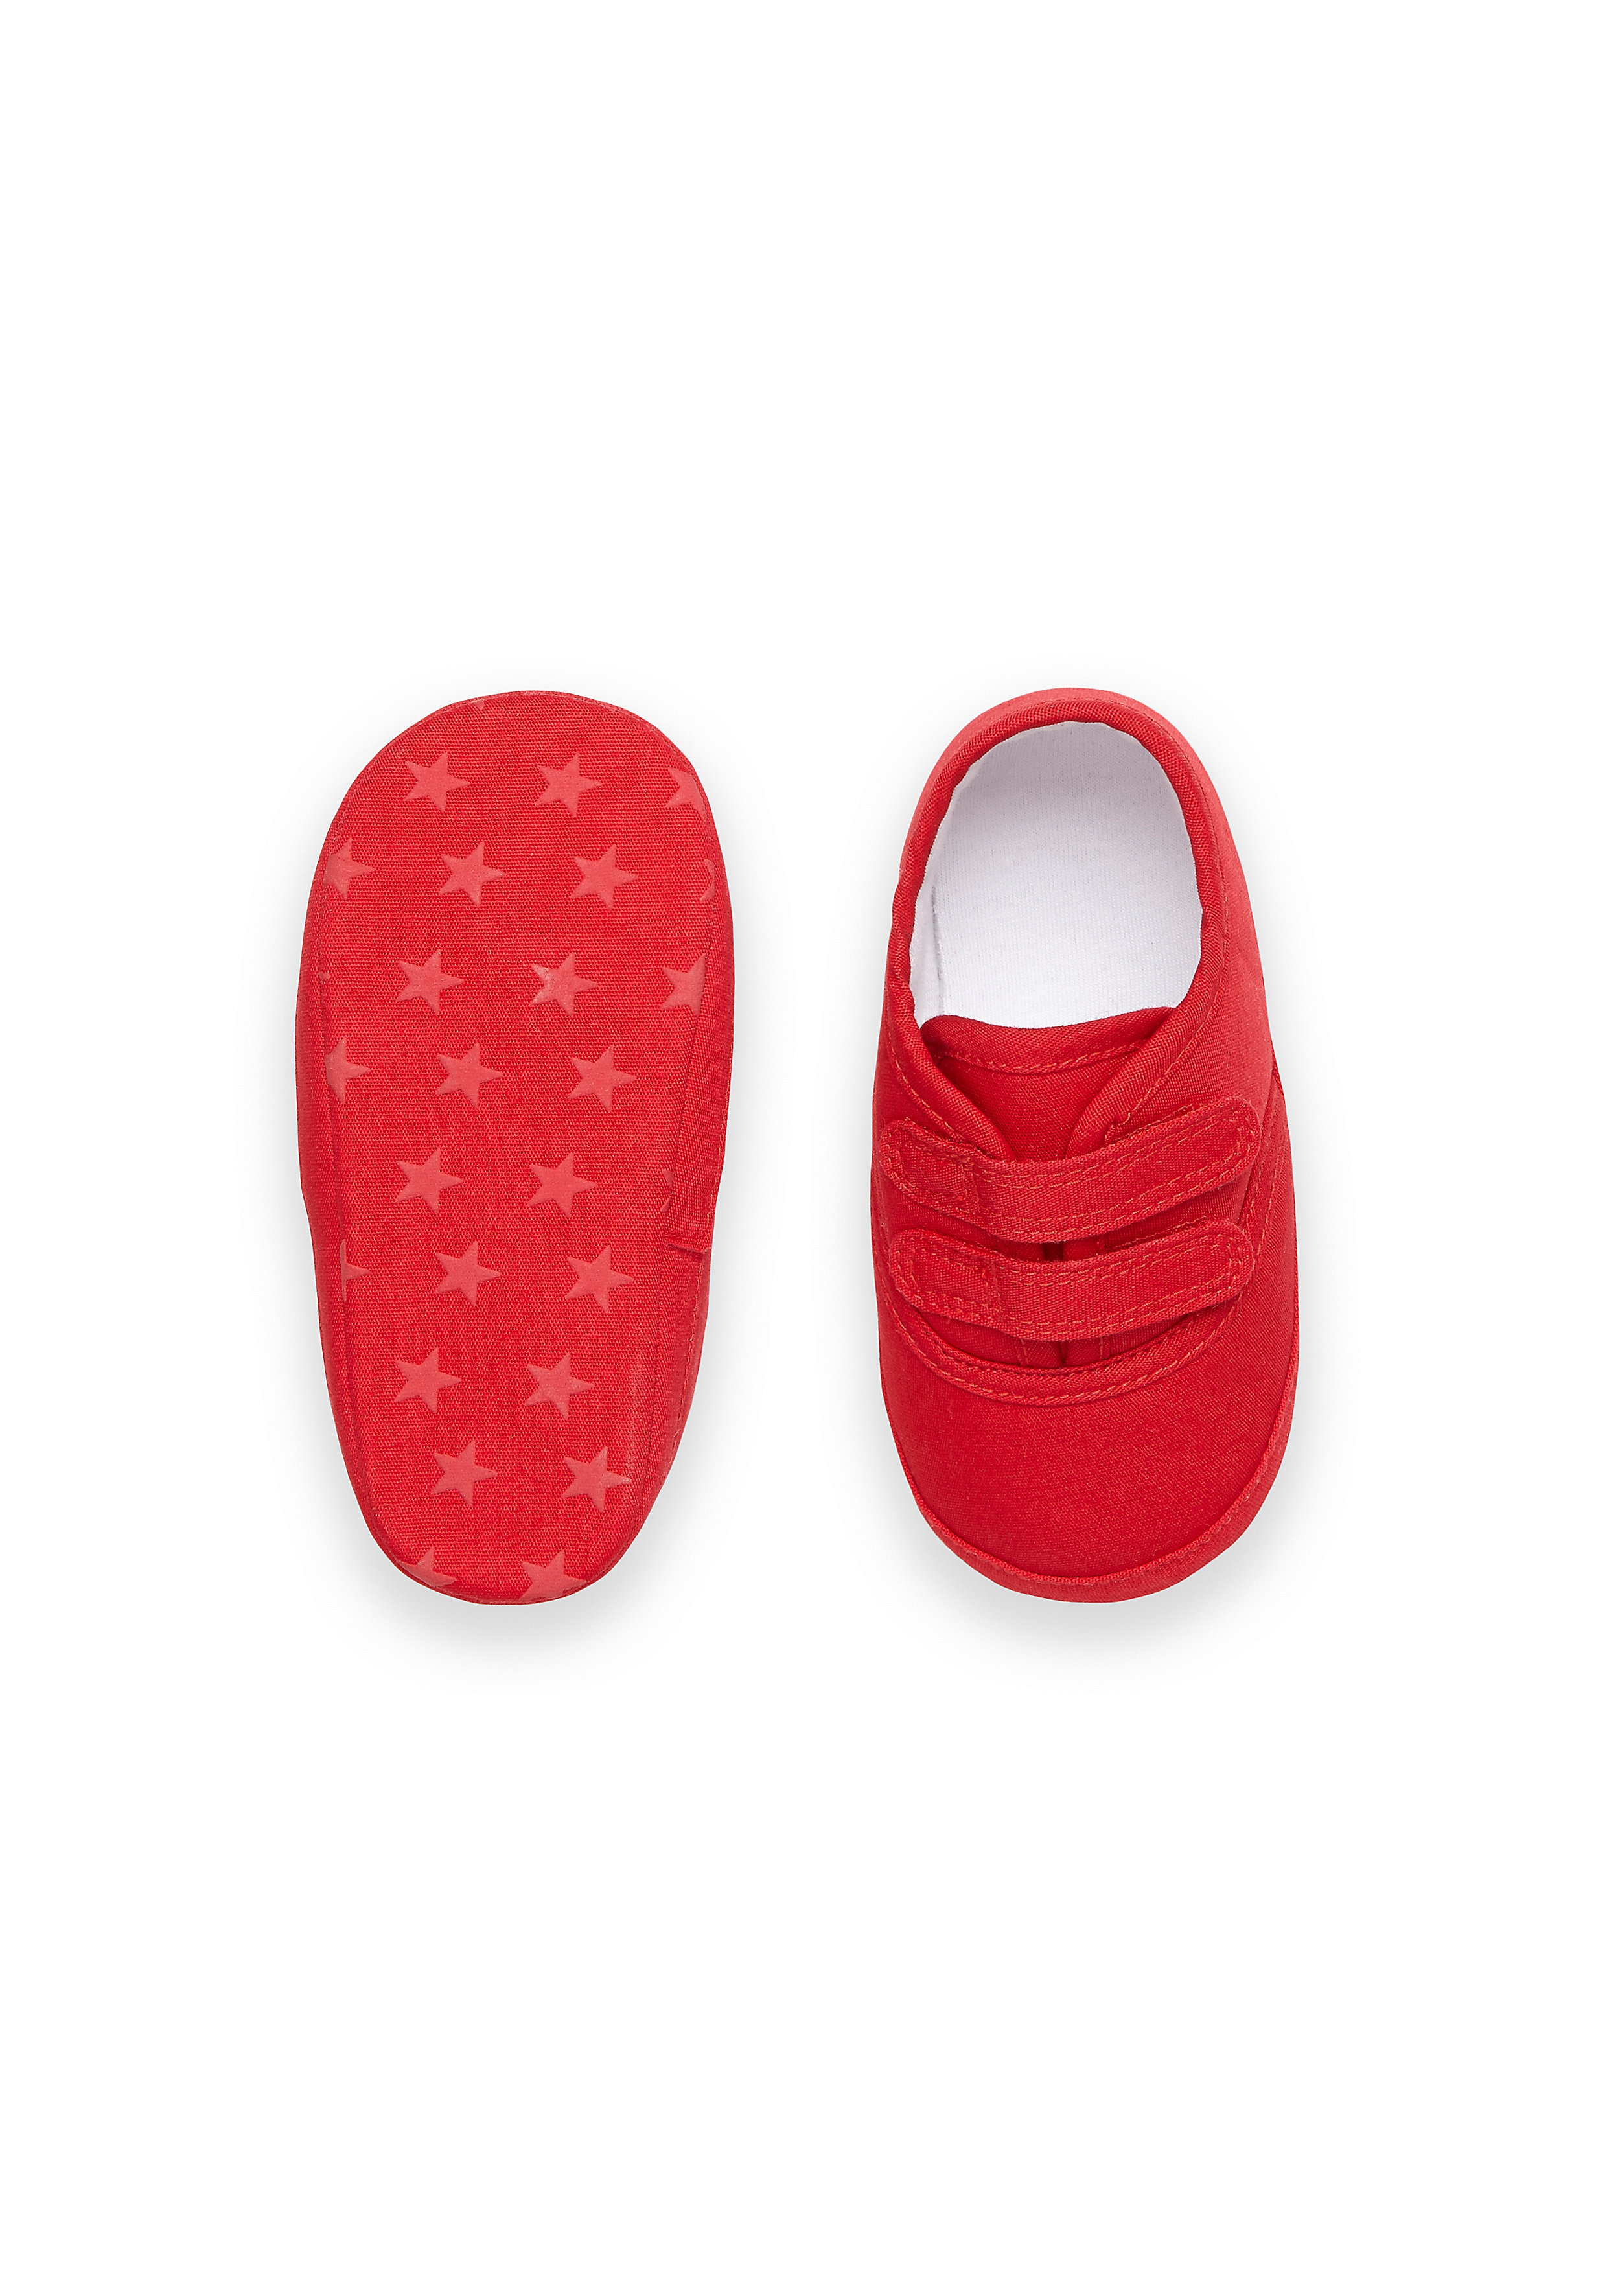 Mothercare | Boys Pram Shoes - Red 2